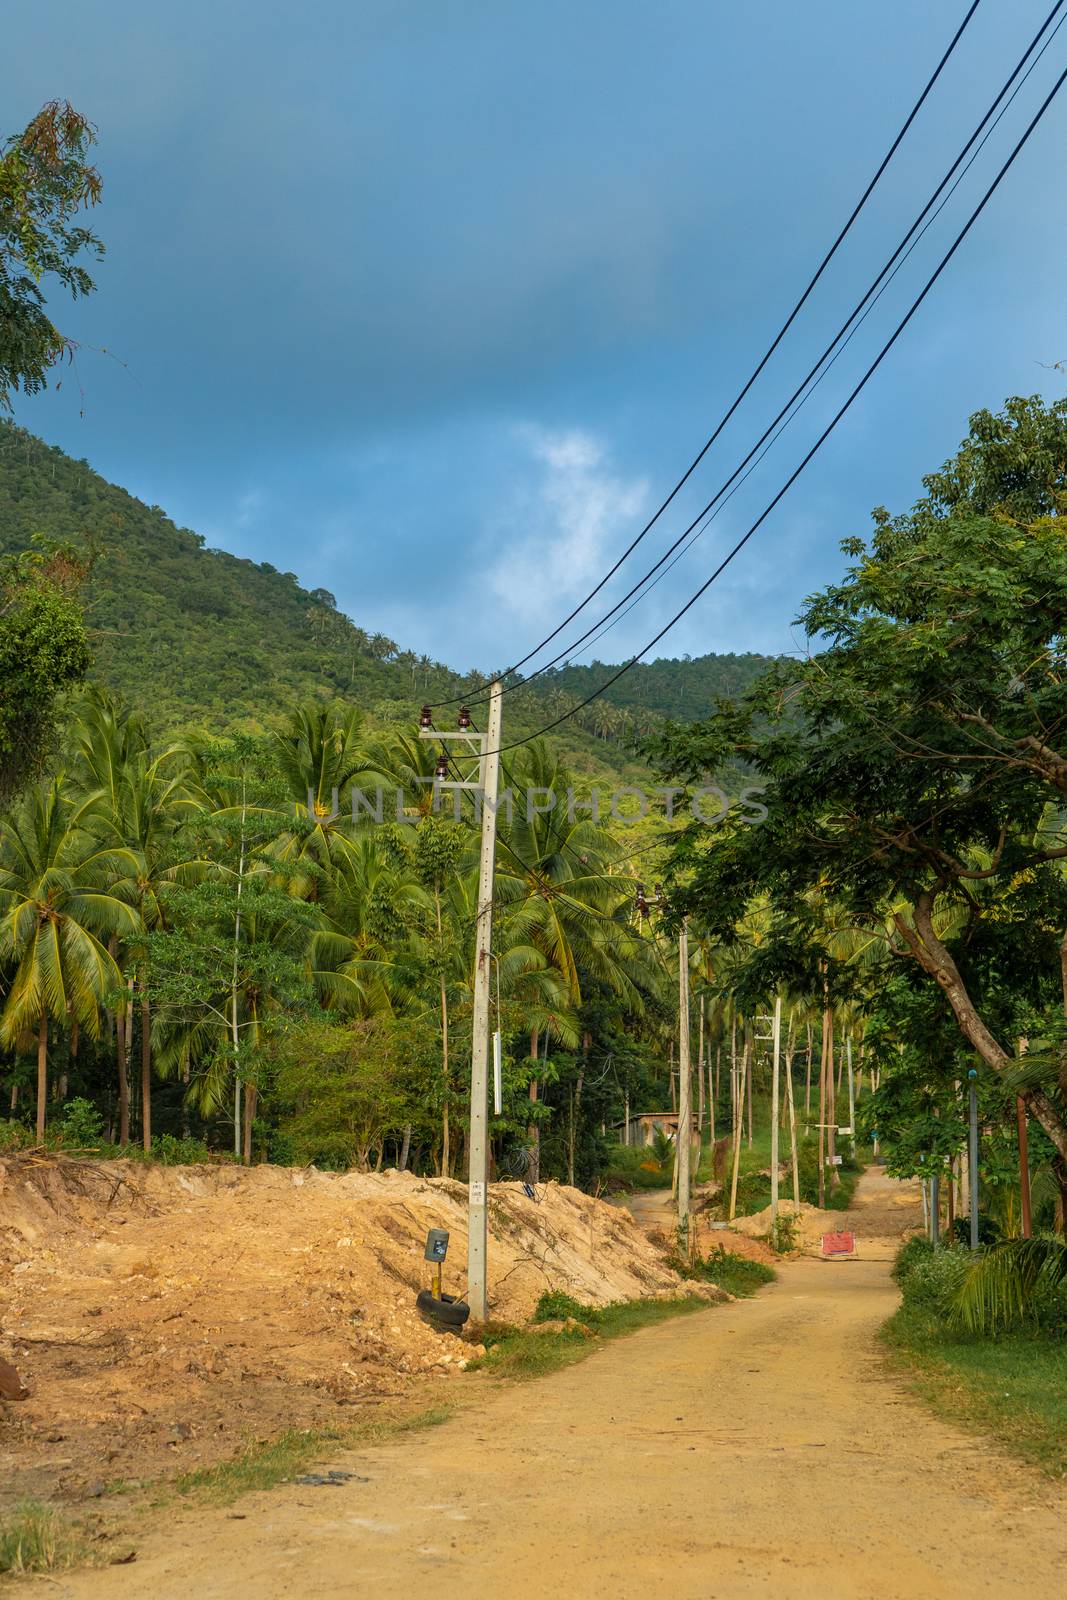 Power line in the jungle. Civilization comes to the wild tropical jungle.